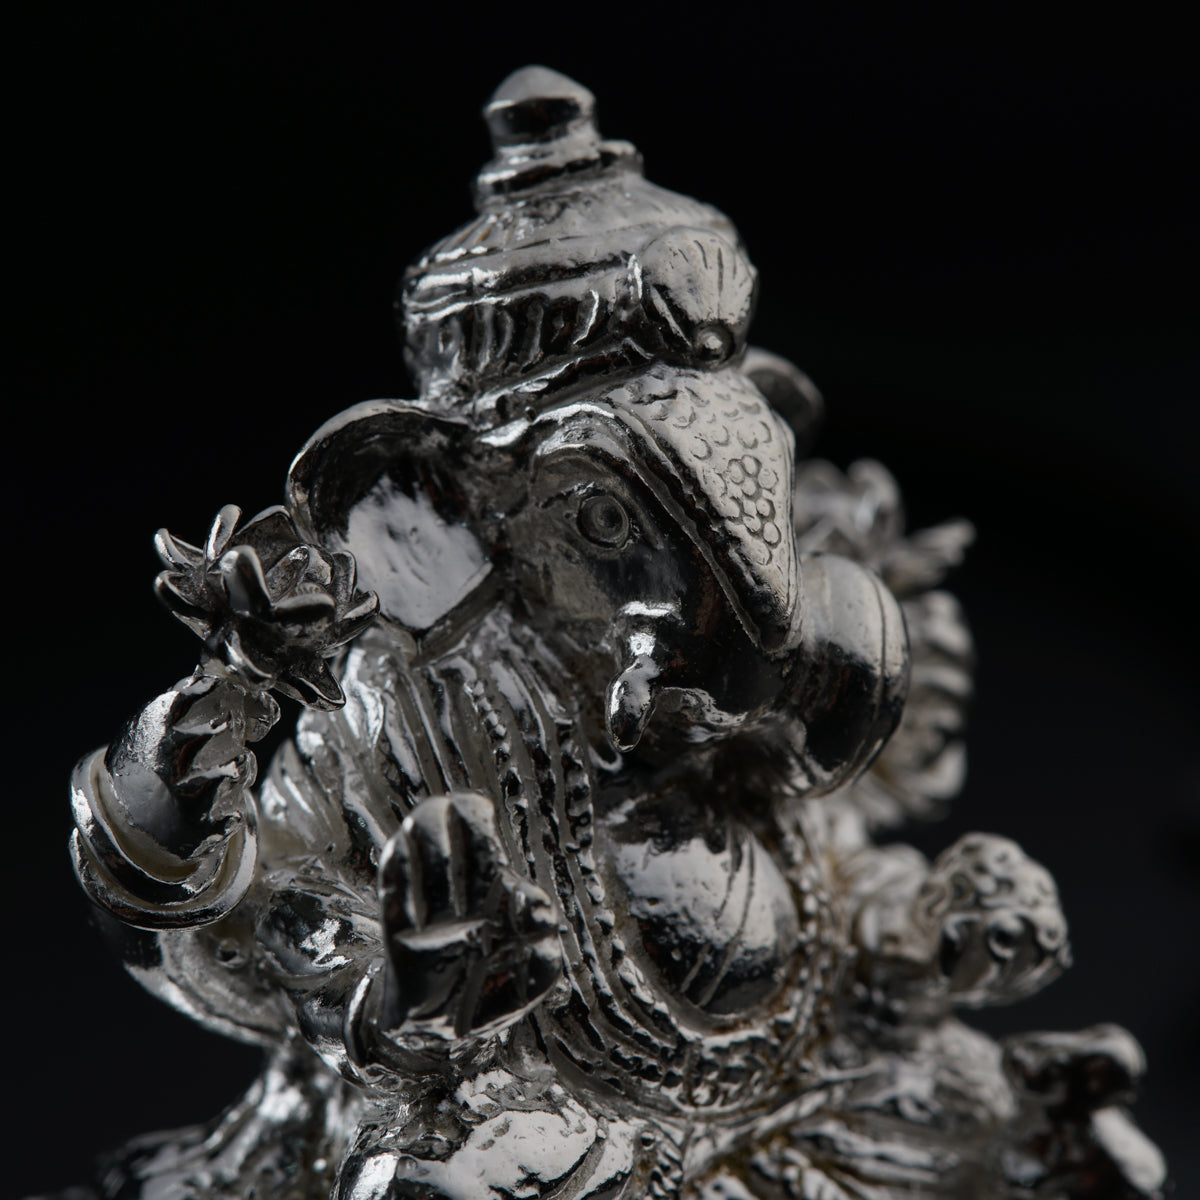 a close up of a silver statue on a black background